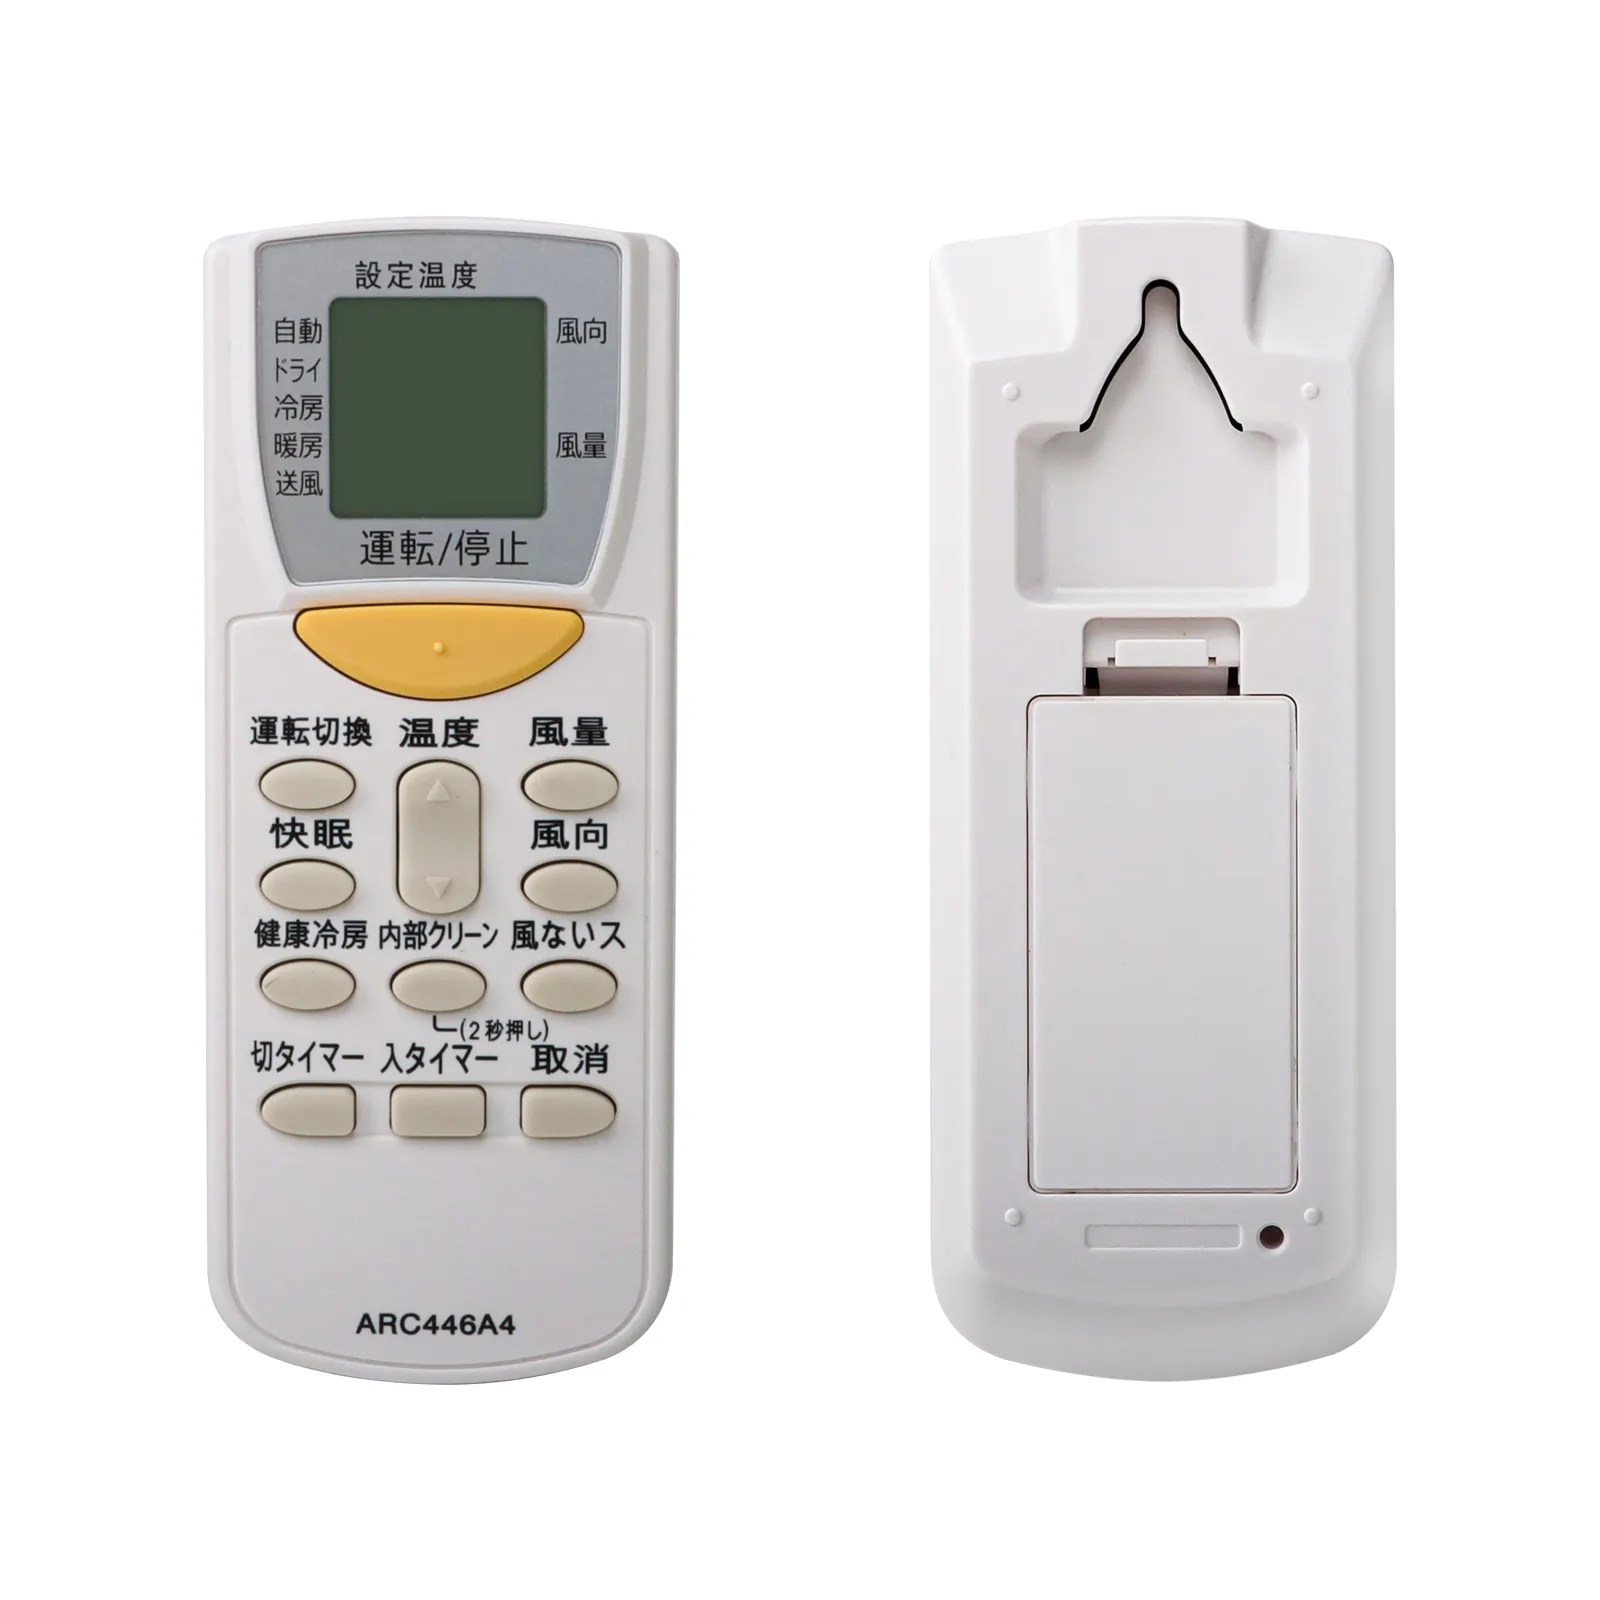 New A/C Remote Control Use for Daikin ARC446A4 Air Conditioner Controller Japanese Version